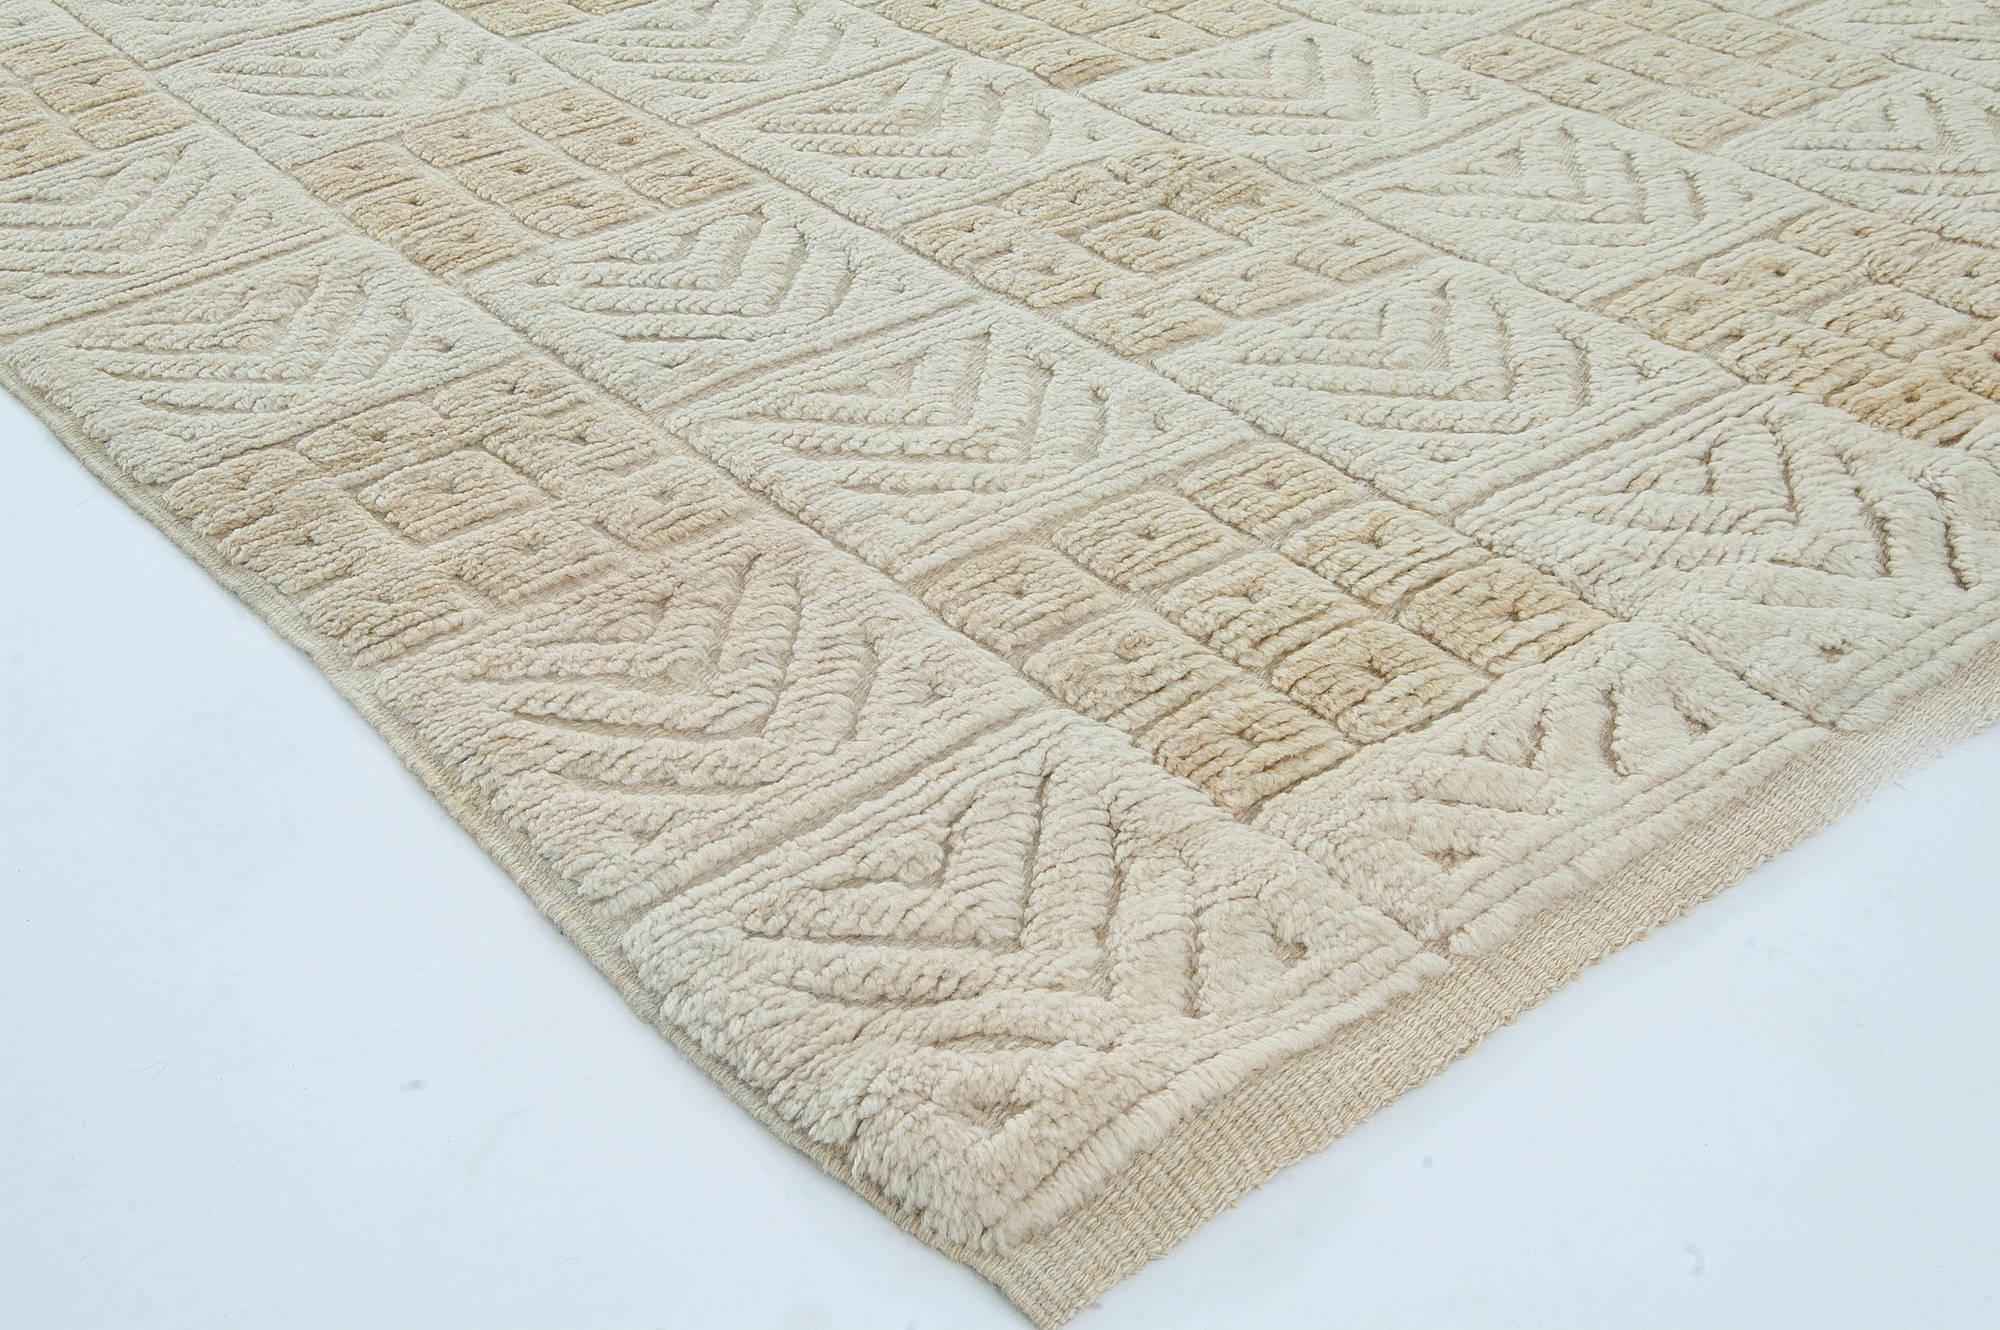 Wool Mid-20th Century Swedish Geometric High Low Knotted Beige Rug For Sale